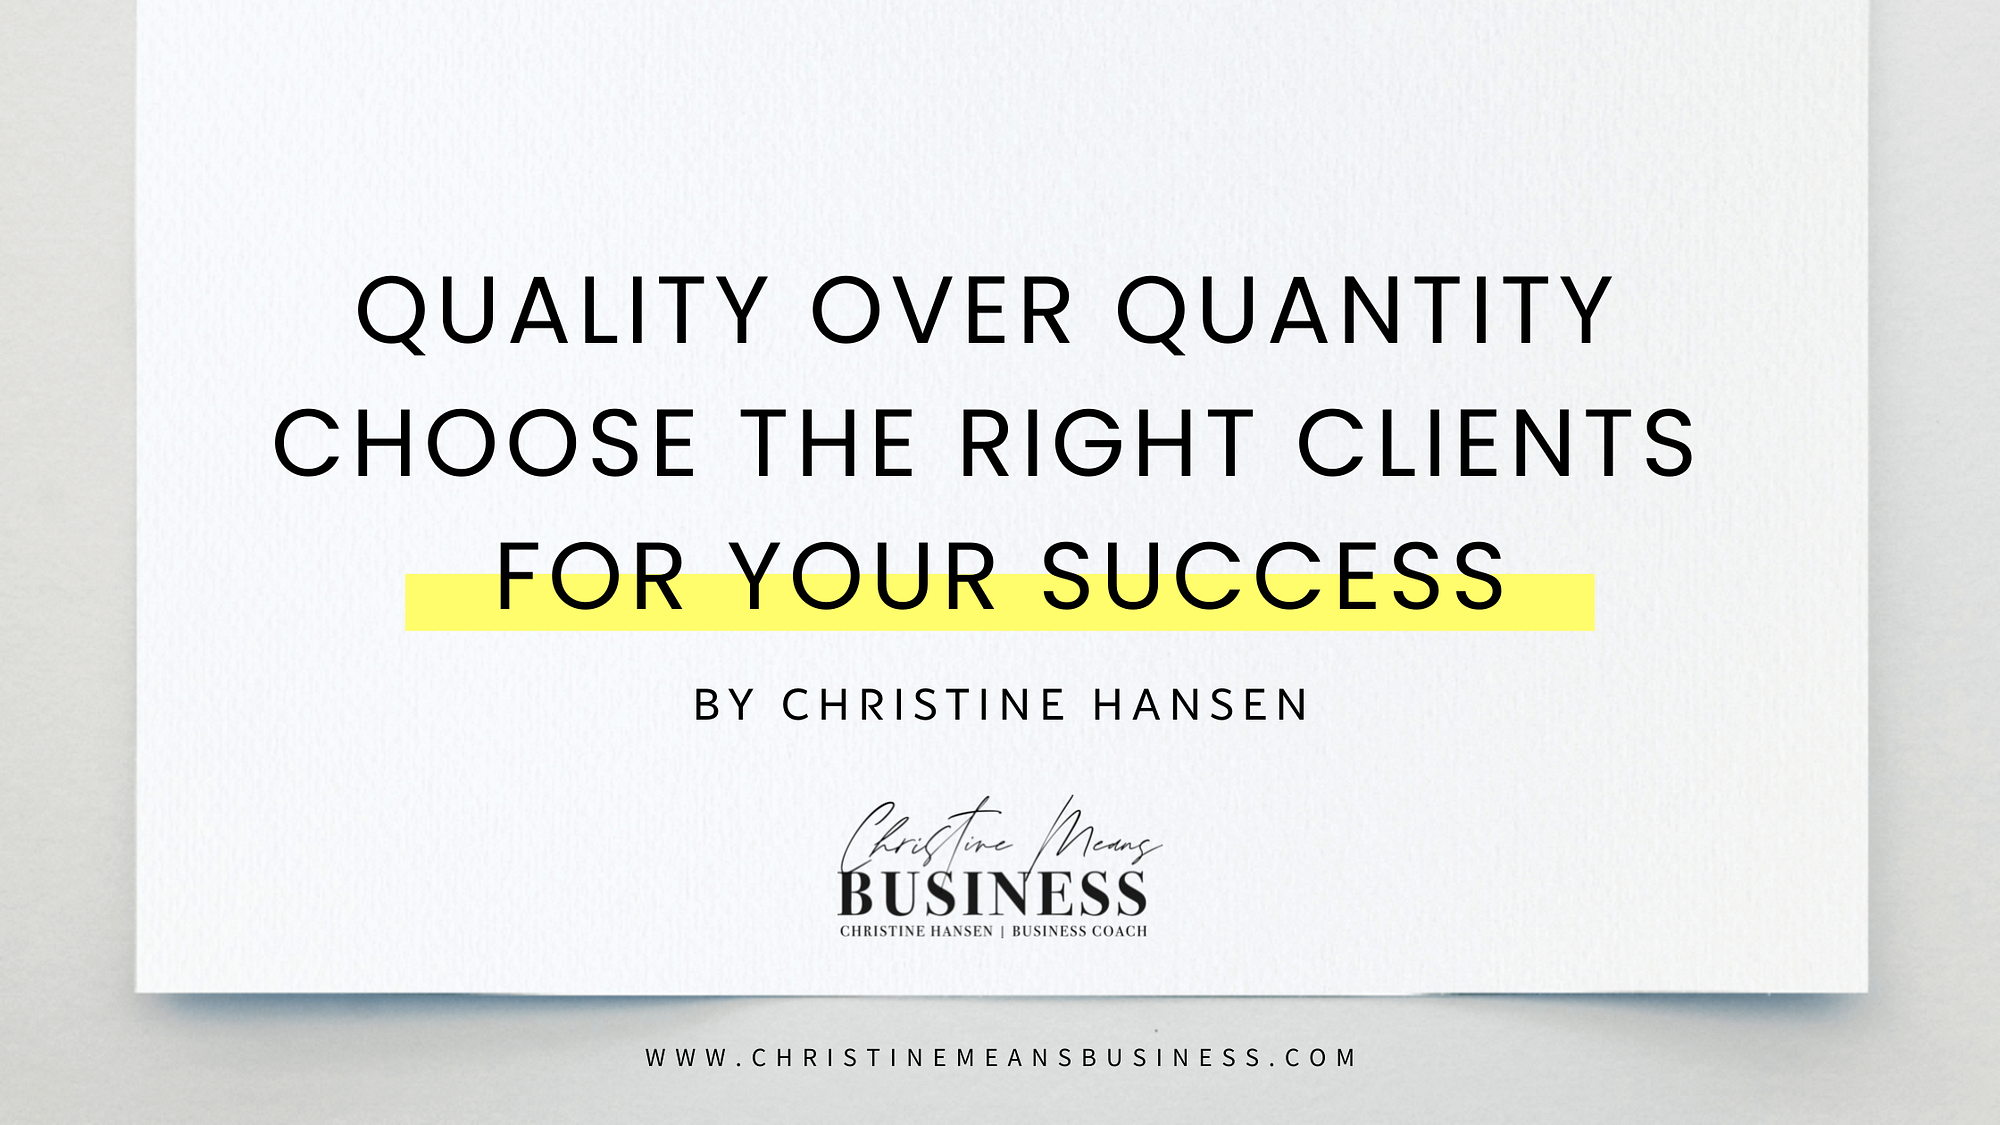 Quality Over Quantity Choose the Right Clients for Your Success